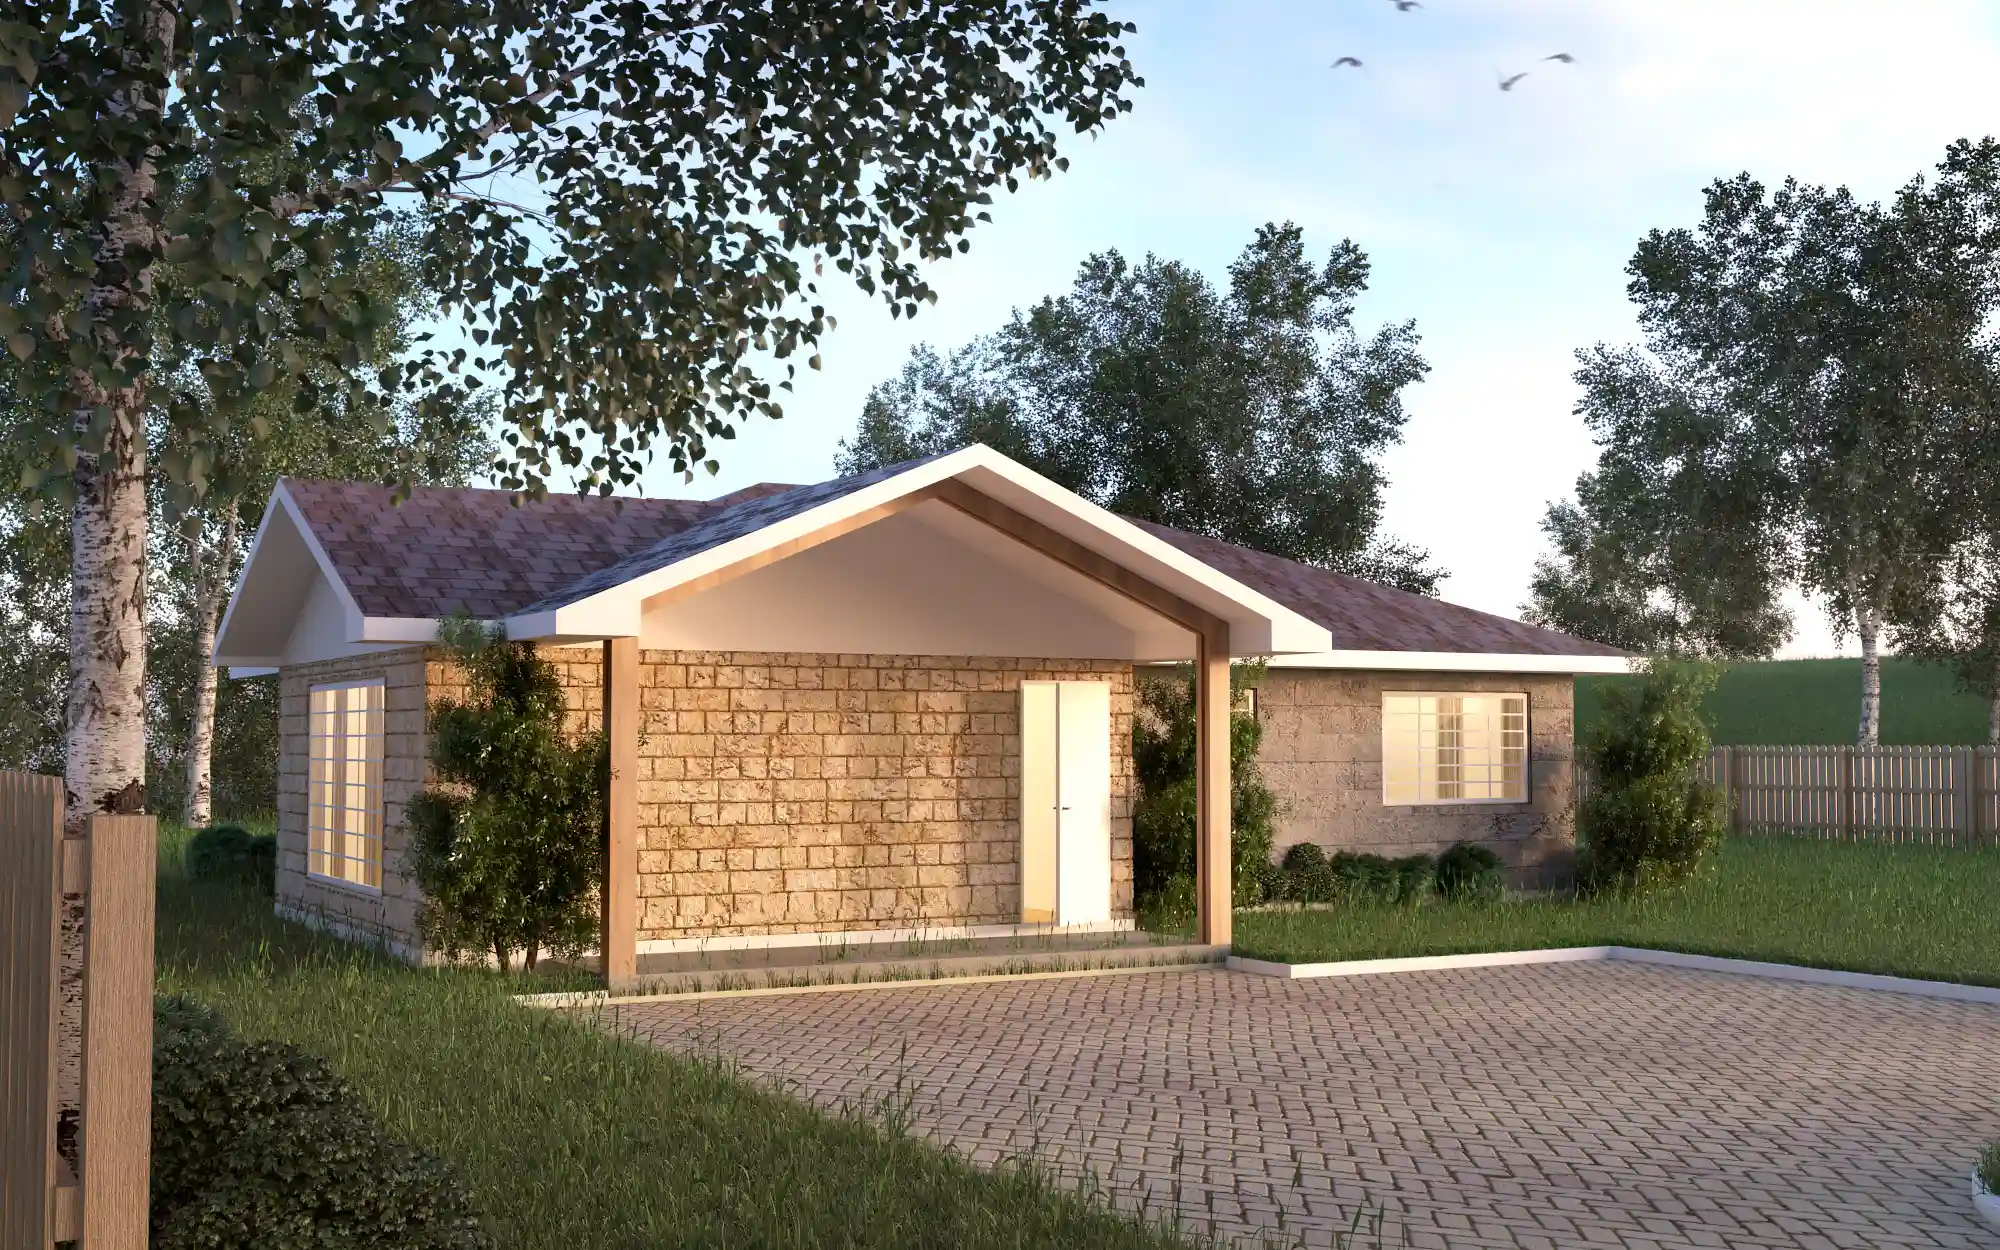 3 Bedroom Bungalow - ID 3162 - 3 BED BNGL TP6 OP1 FRONT.jpg from Inuua Tujenge house plans with 3 bedrooms and 2 bathrooms. ( bungalow )